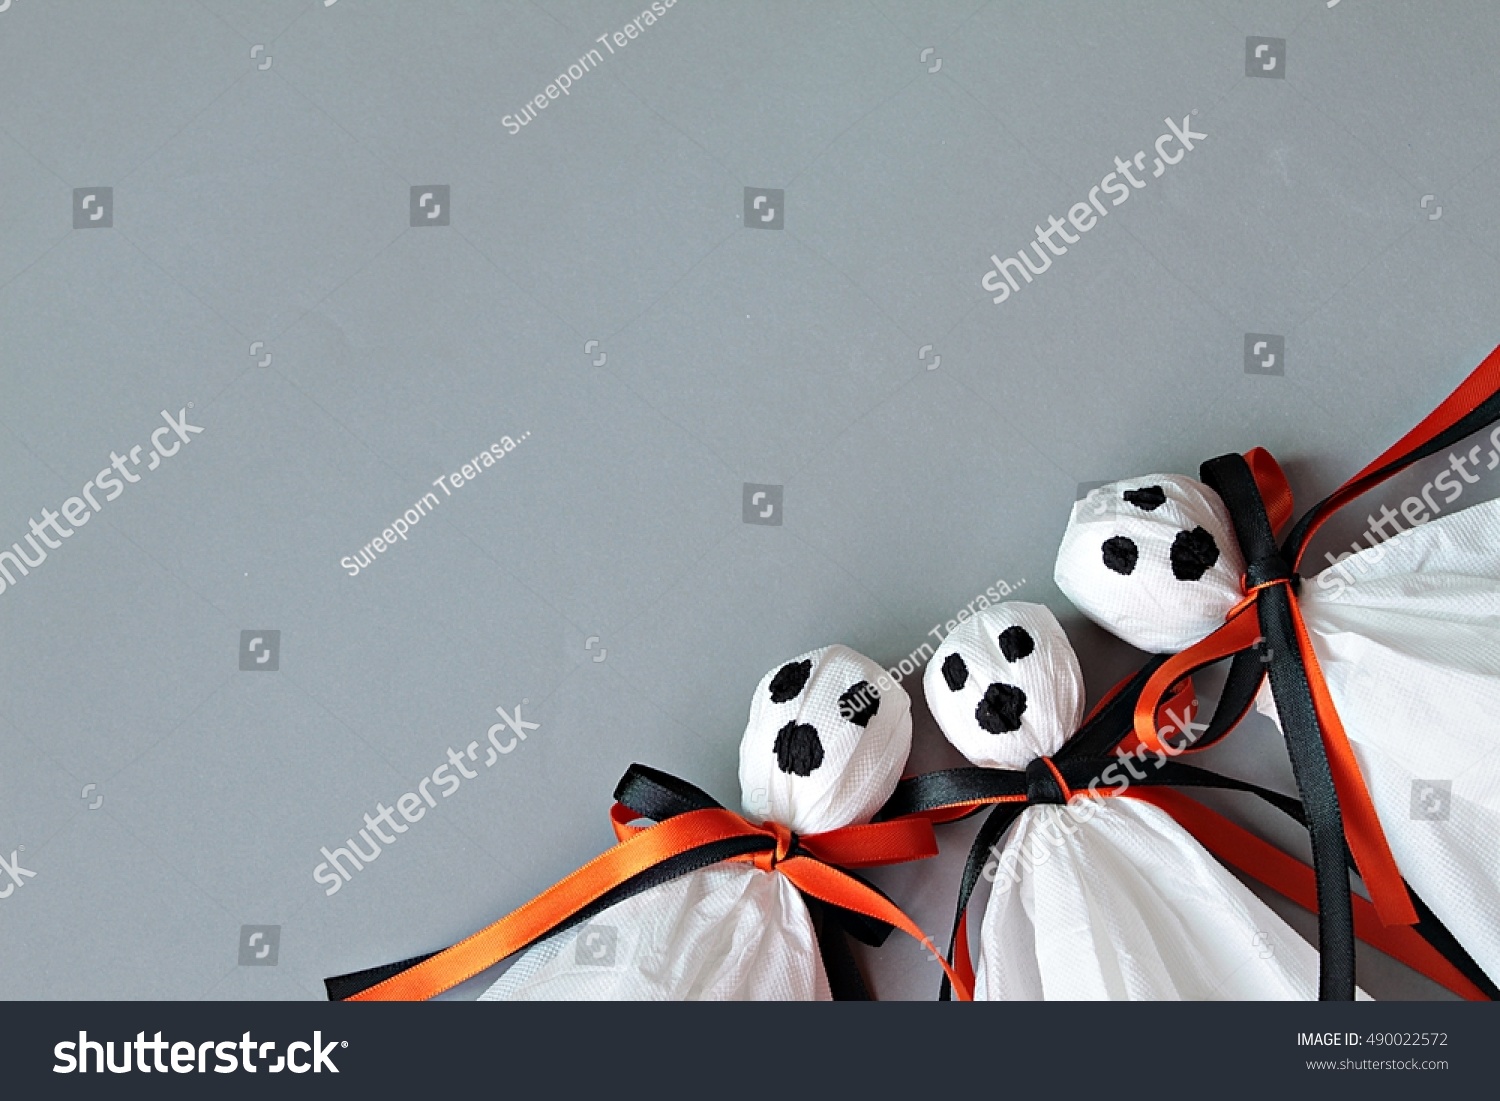 Halloween concept background : Three halloween ghosts DIY made from white tissue paper, black and orange ribbon on gray background
 #490022572